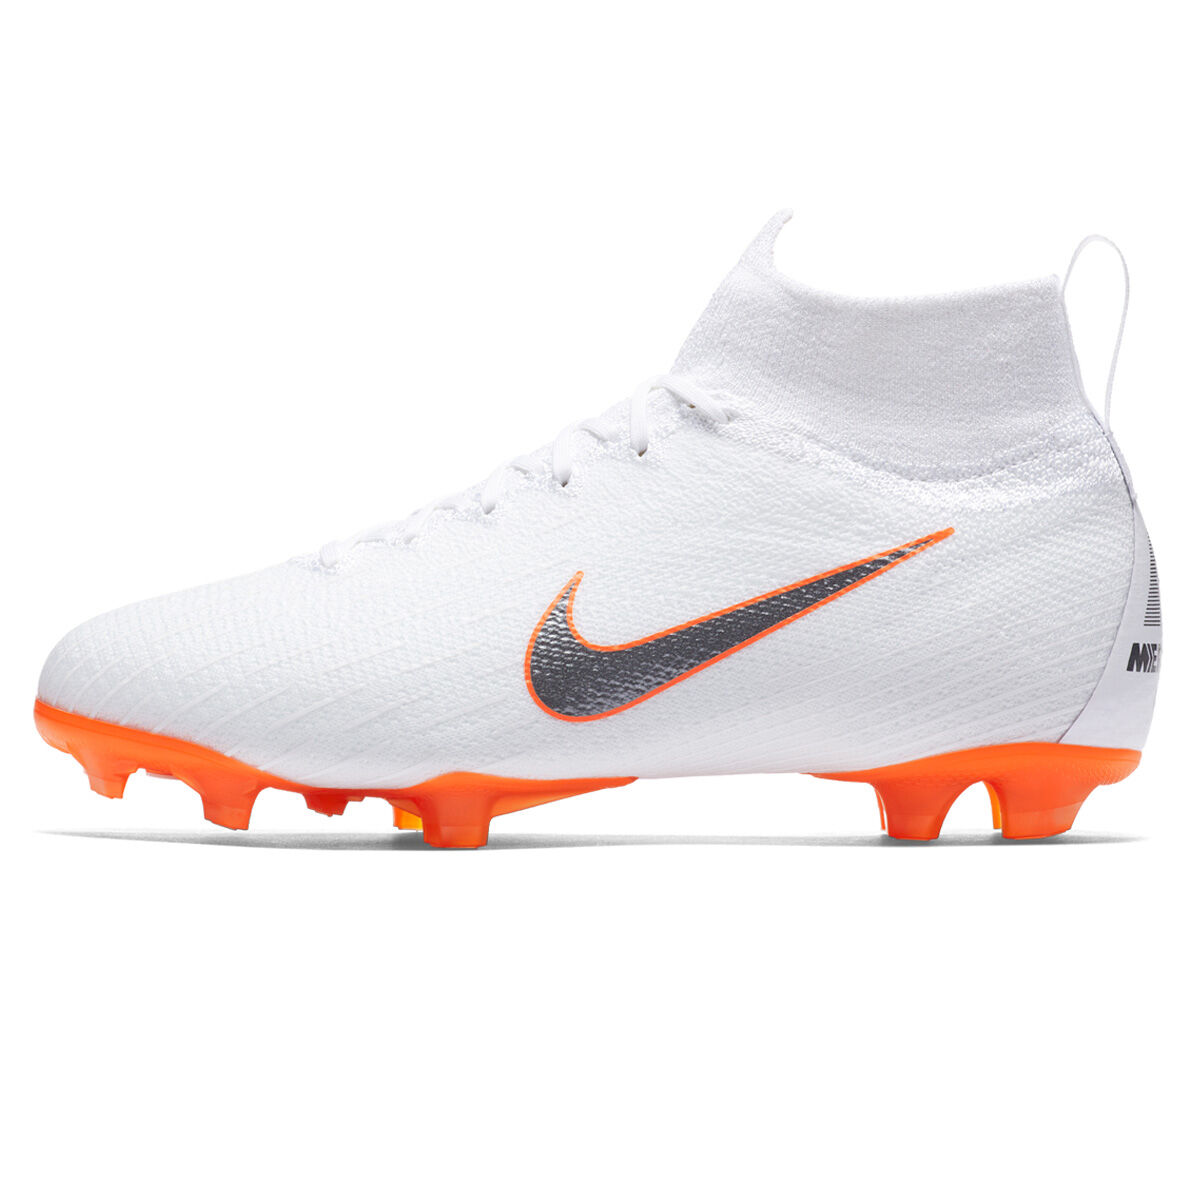 Nike Mercurial Superfly 7 Elite MDS FG Soccer Cleats.